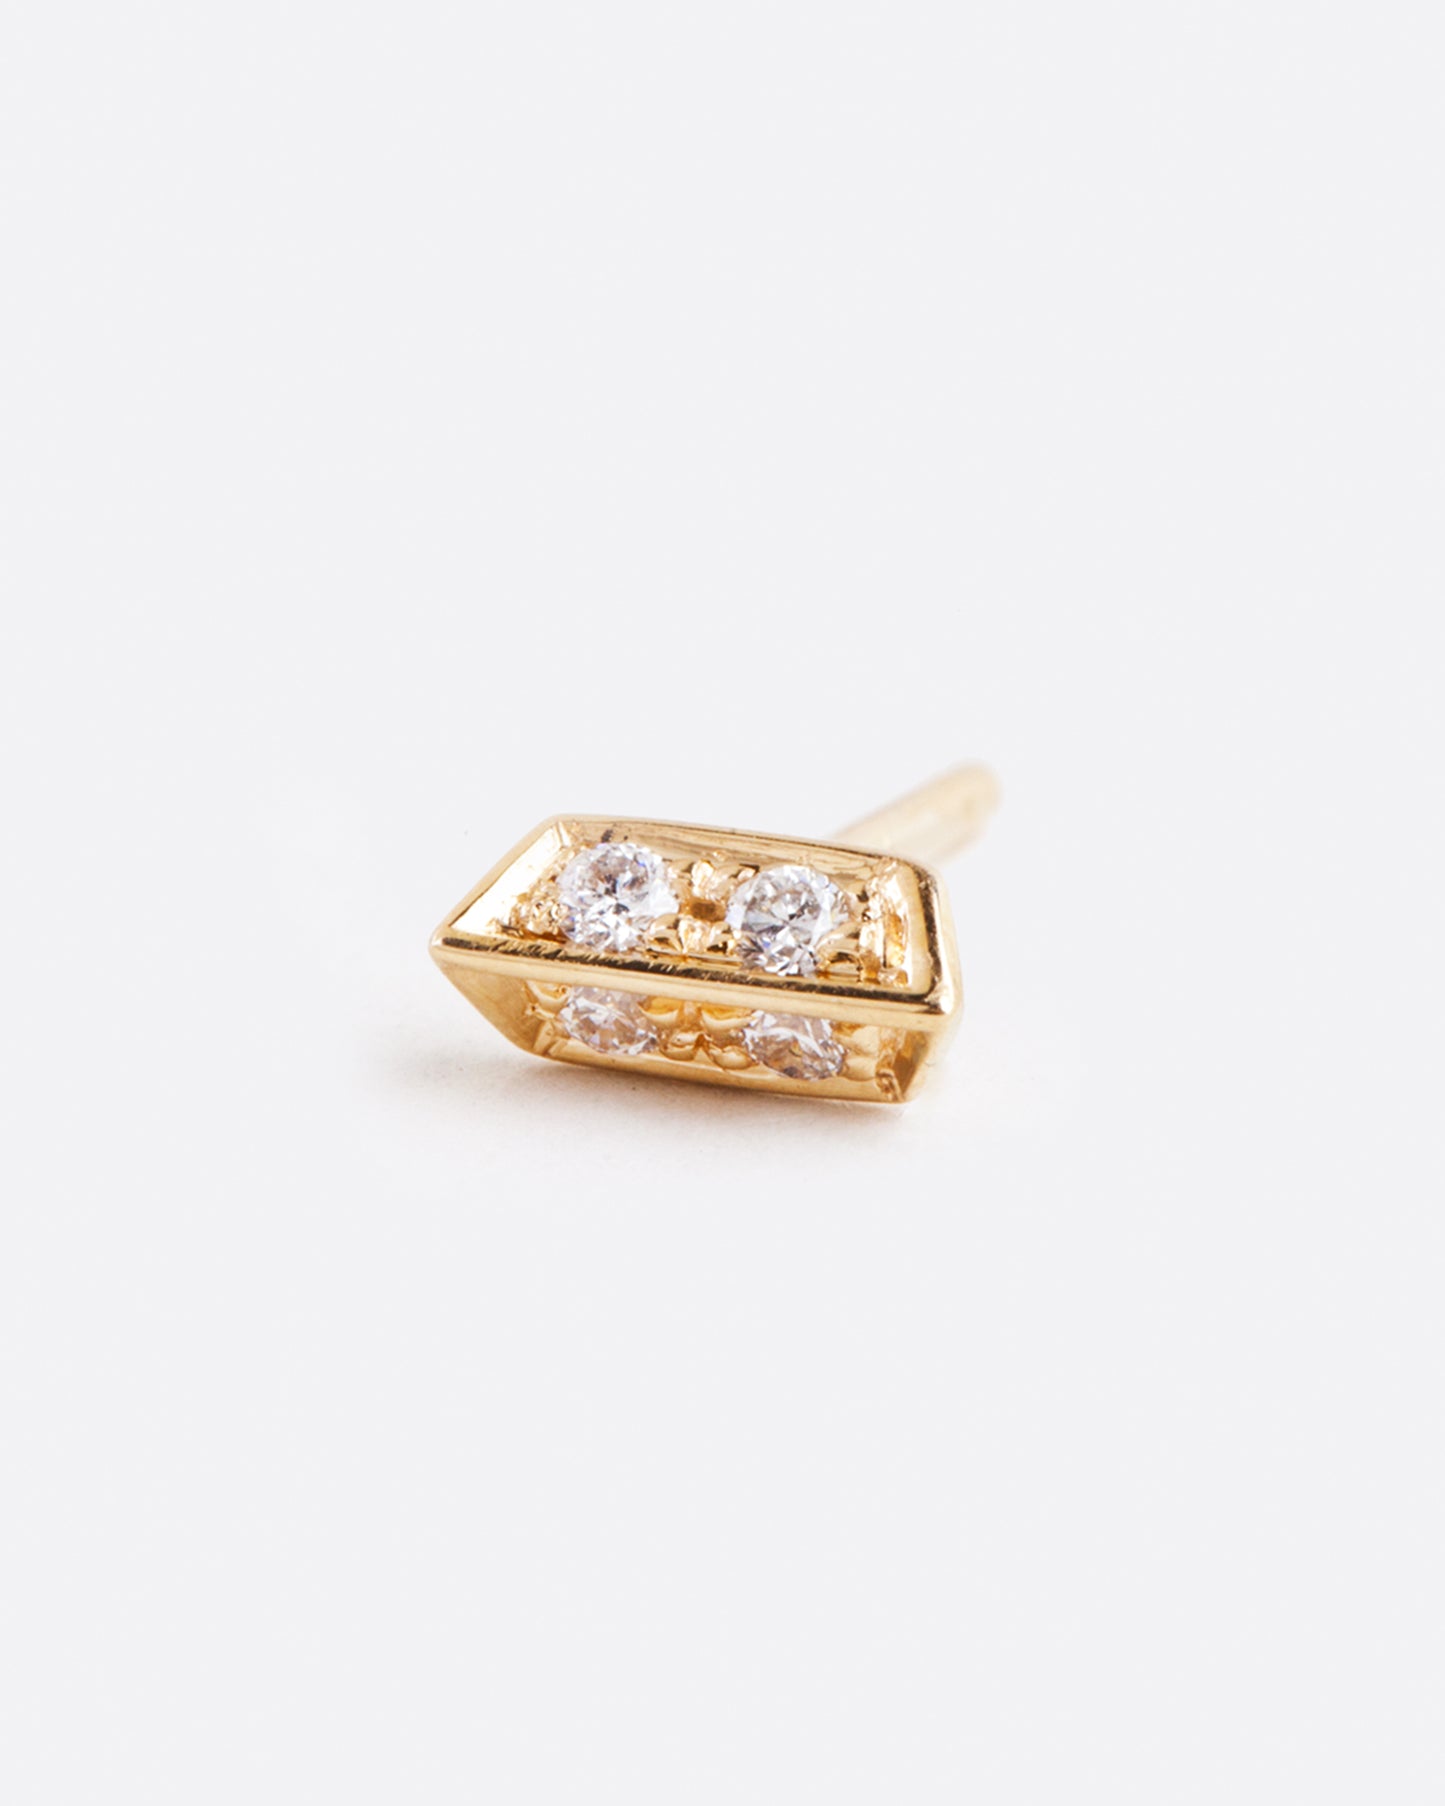 14k yellow gold angled bar stud earring with diamonds by Selin Kent, shown from the front.